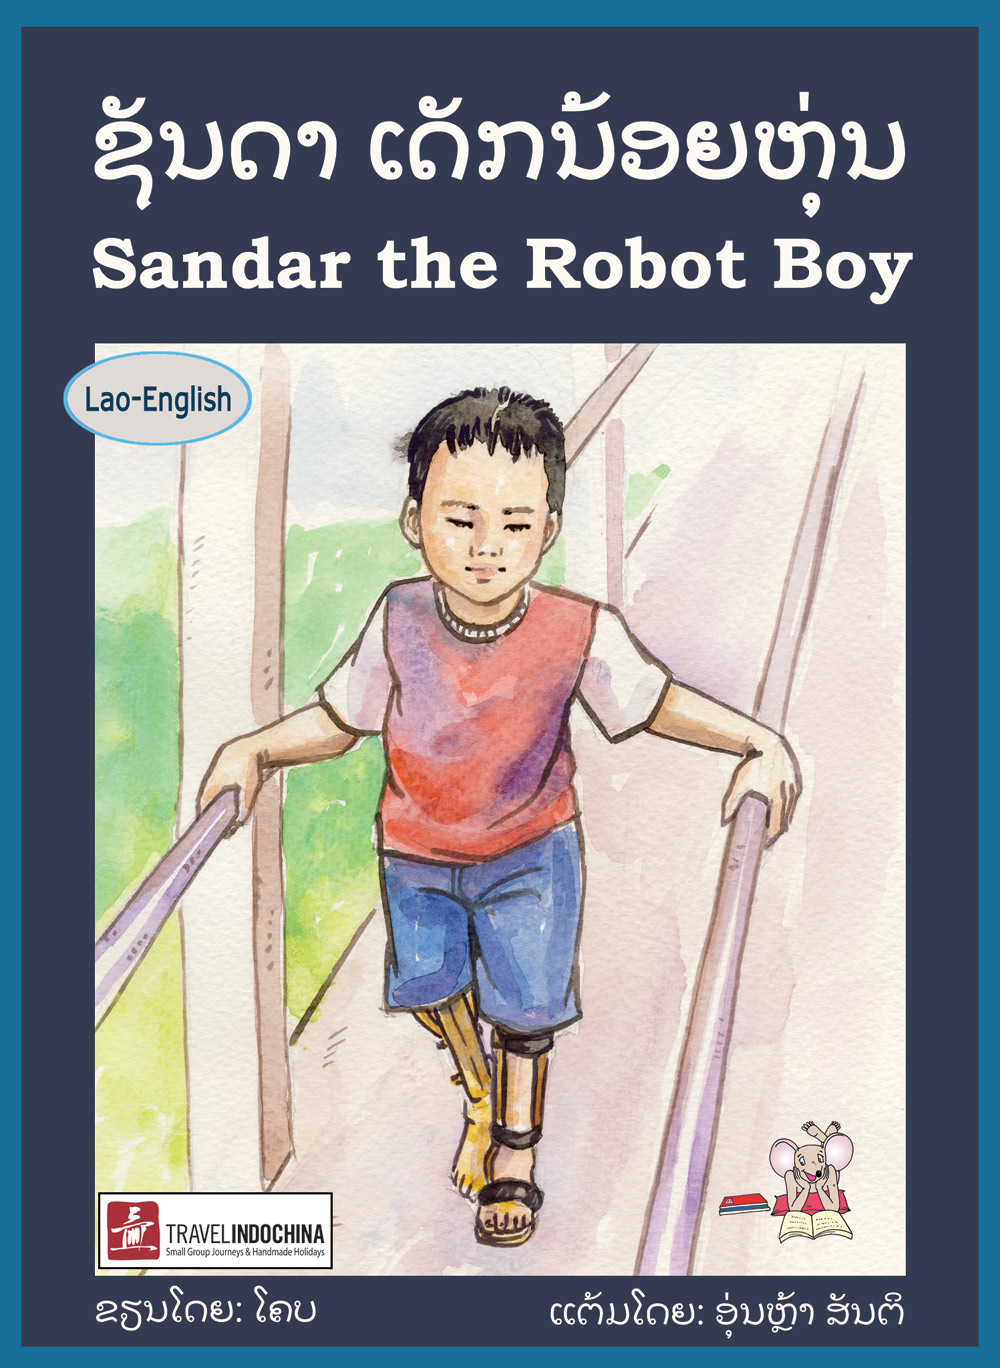 Sandar: The Robot Boy large book cover, published in Lao and English